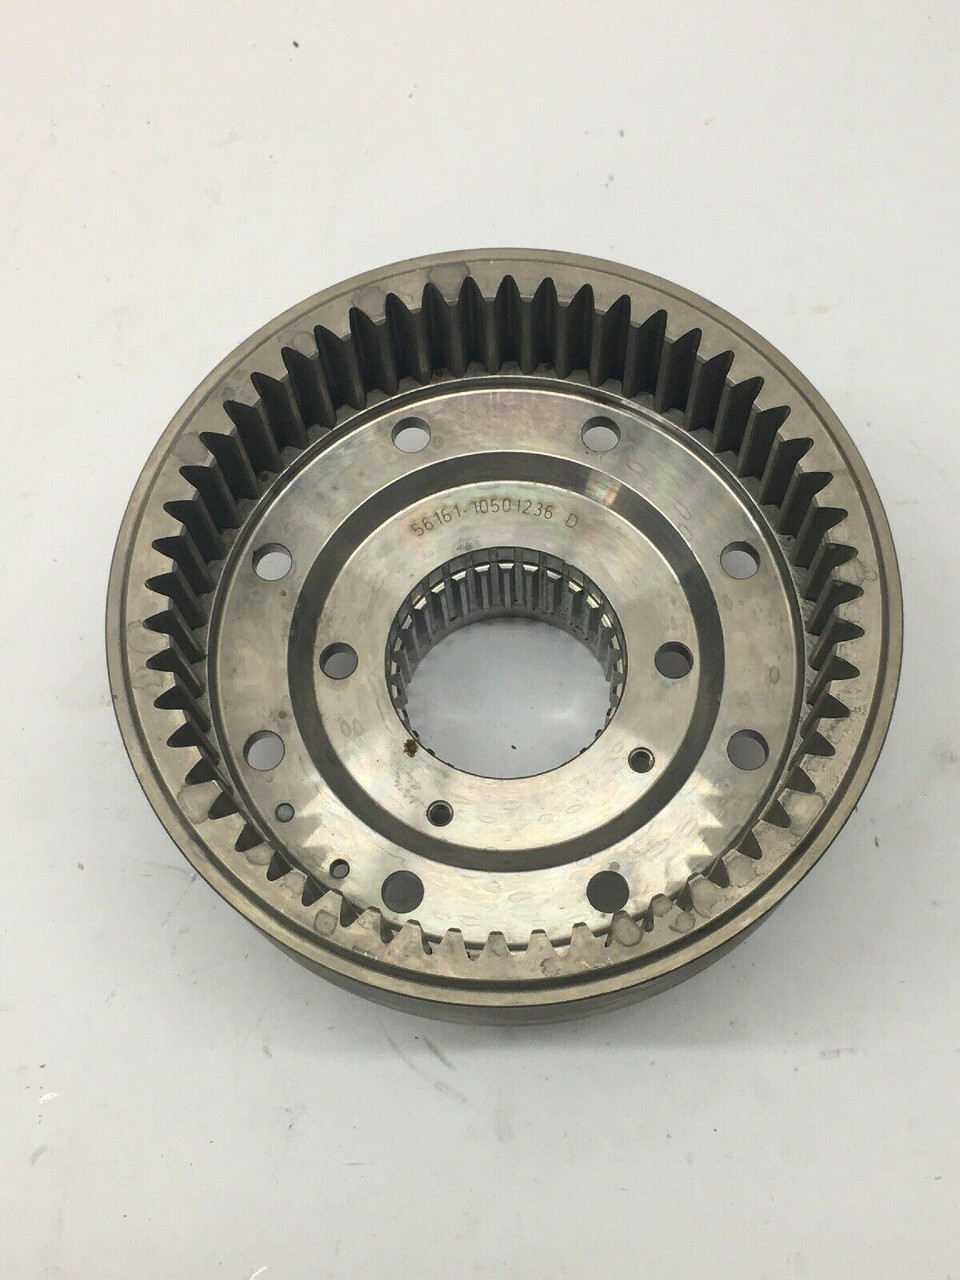 Left Assembly Ring Gear 10501197 Aztec